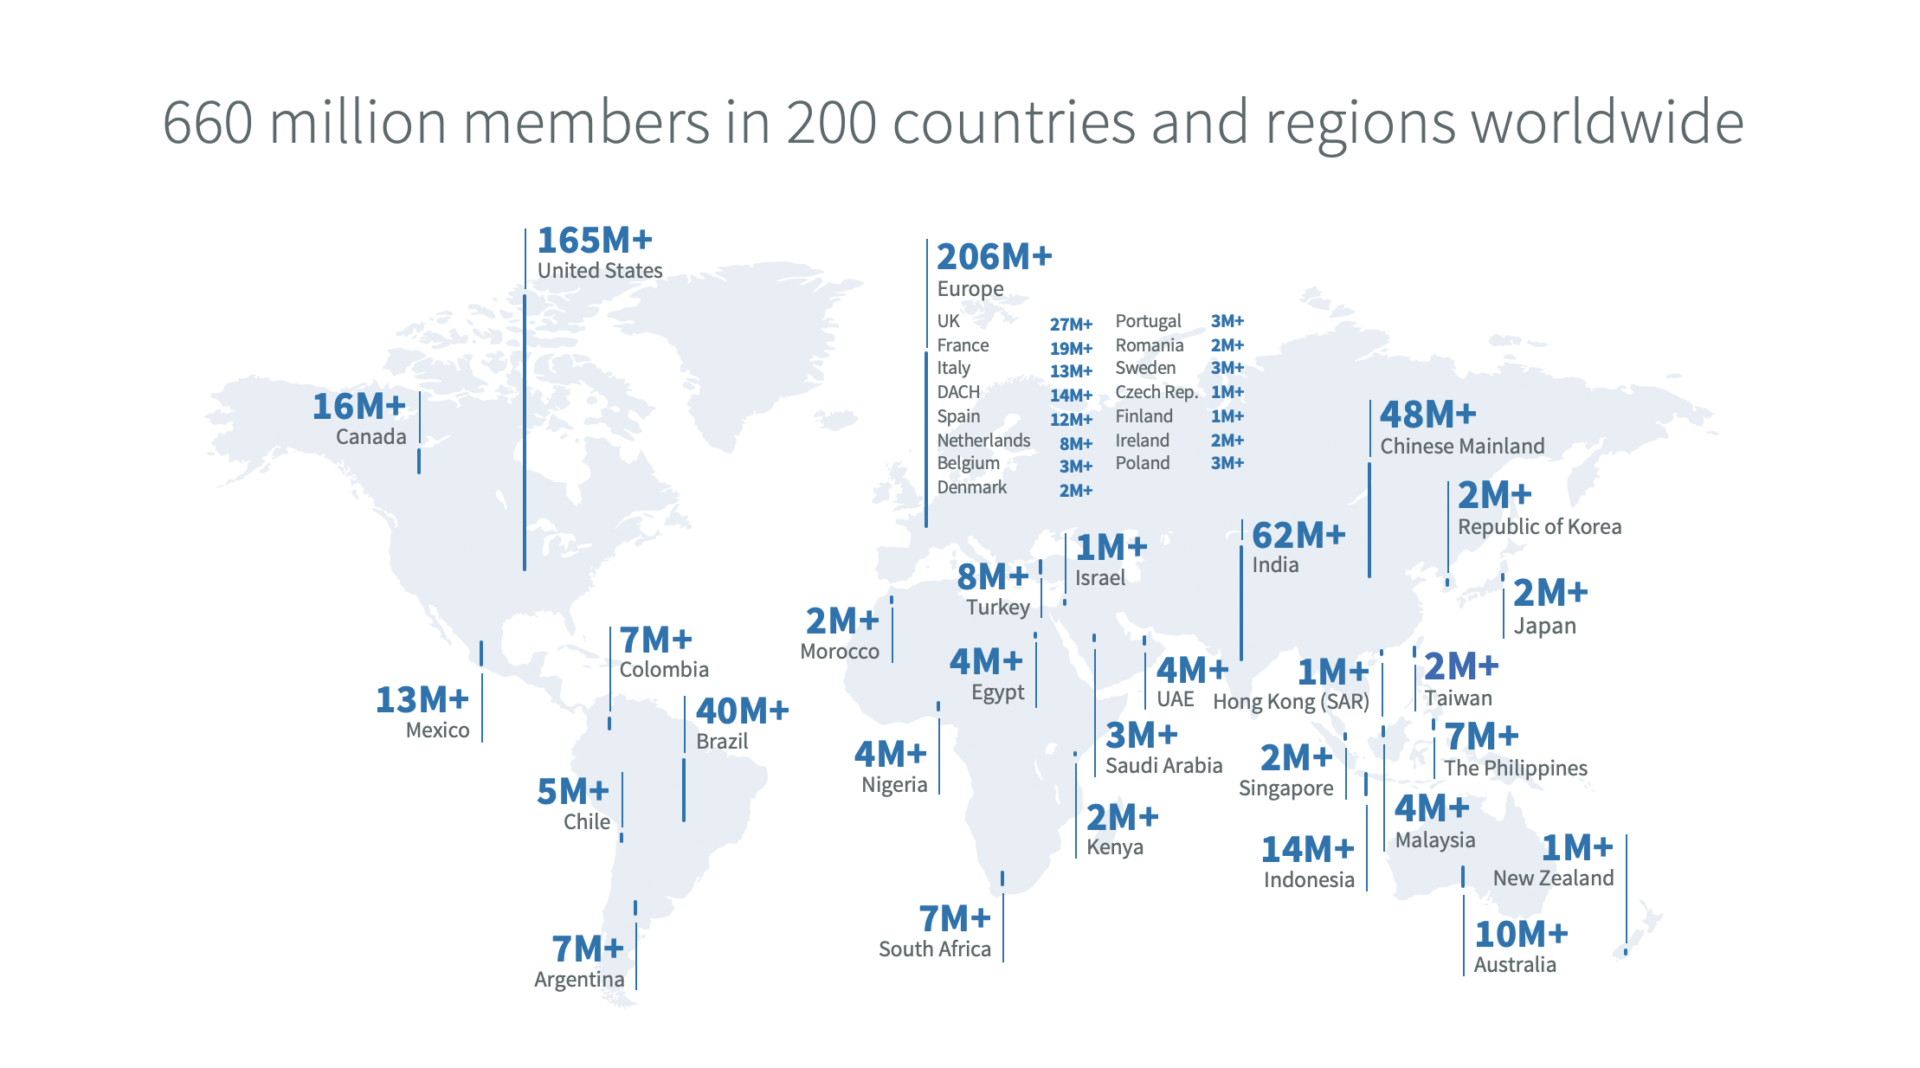 LinkedIn by country